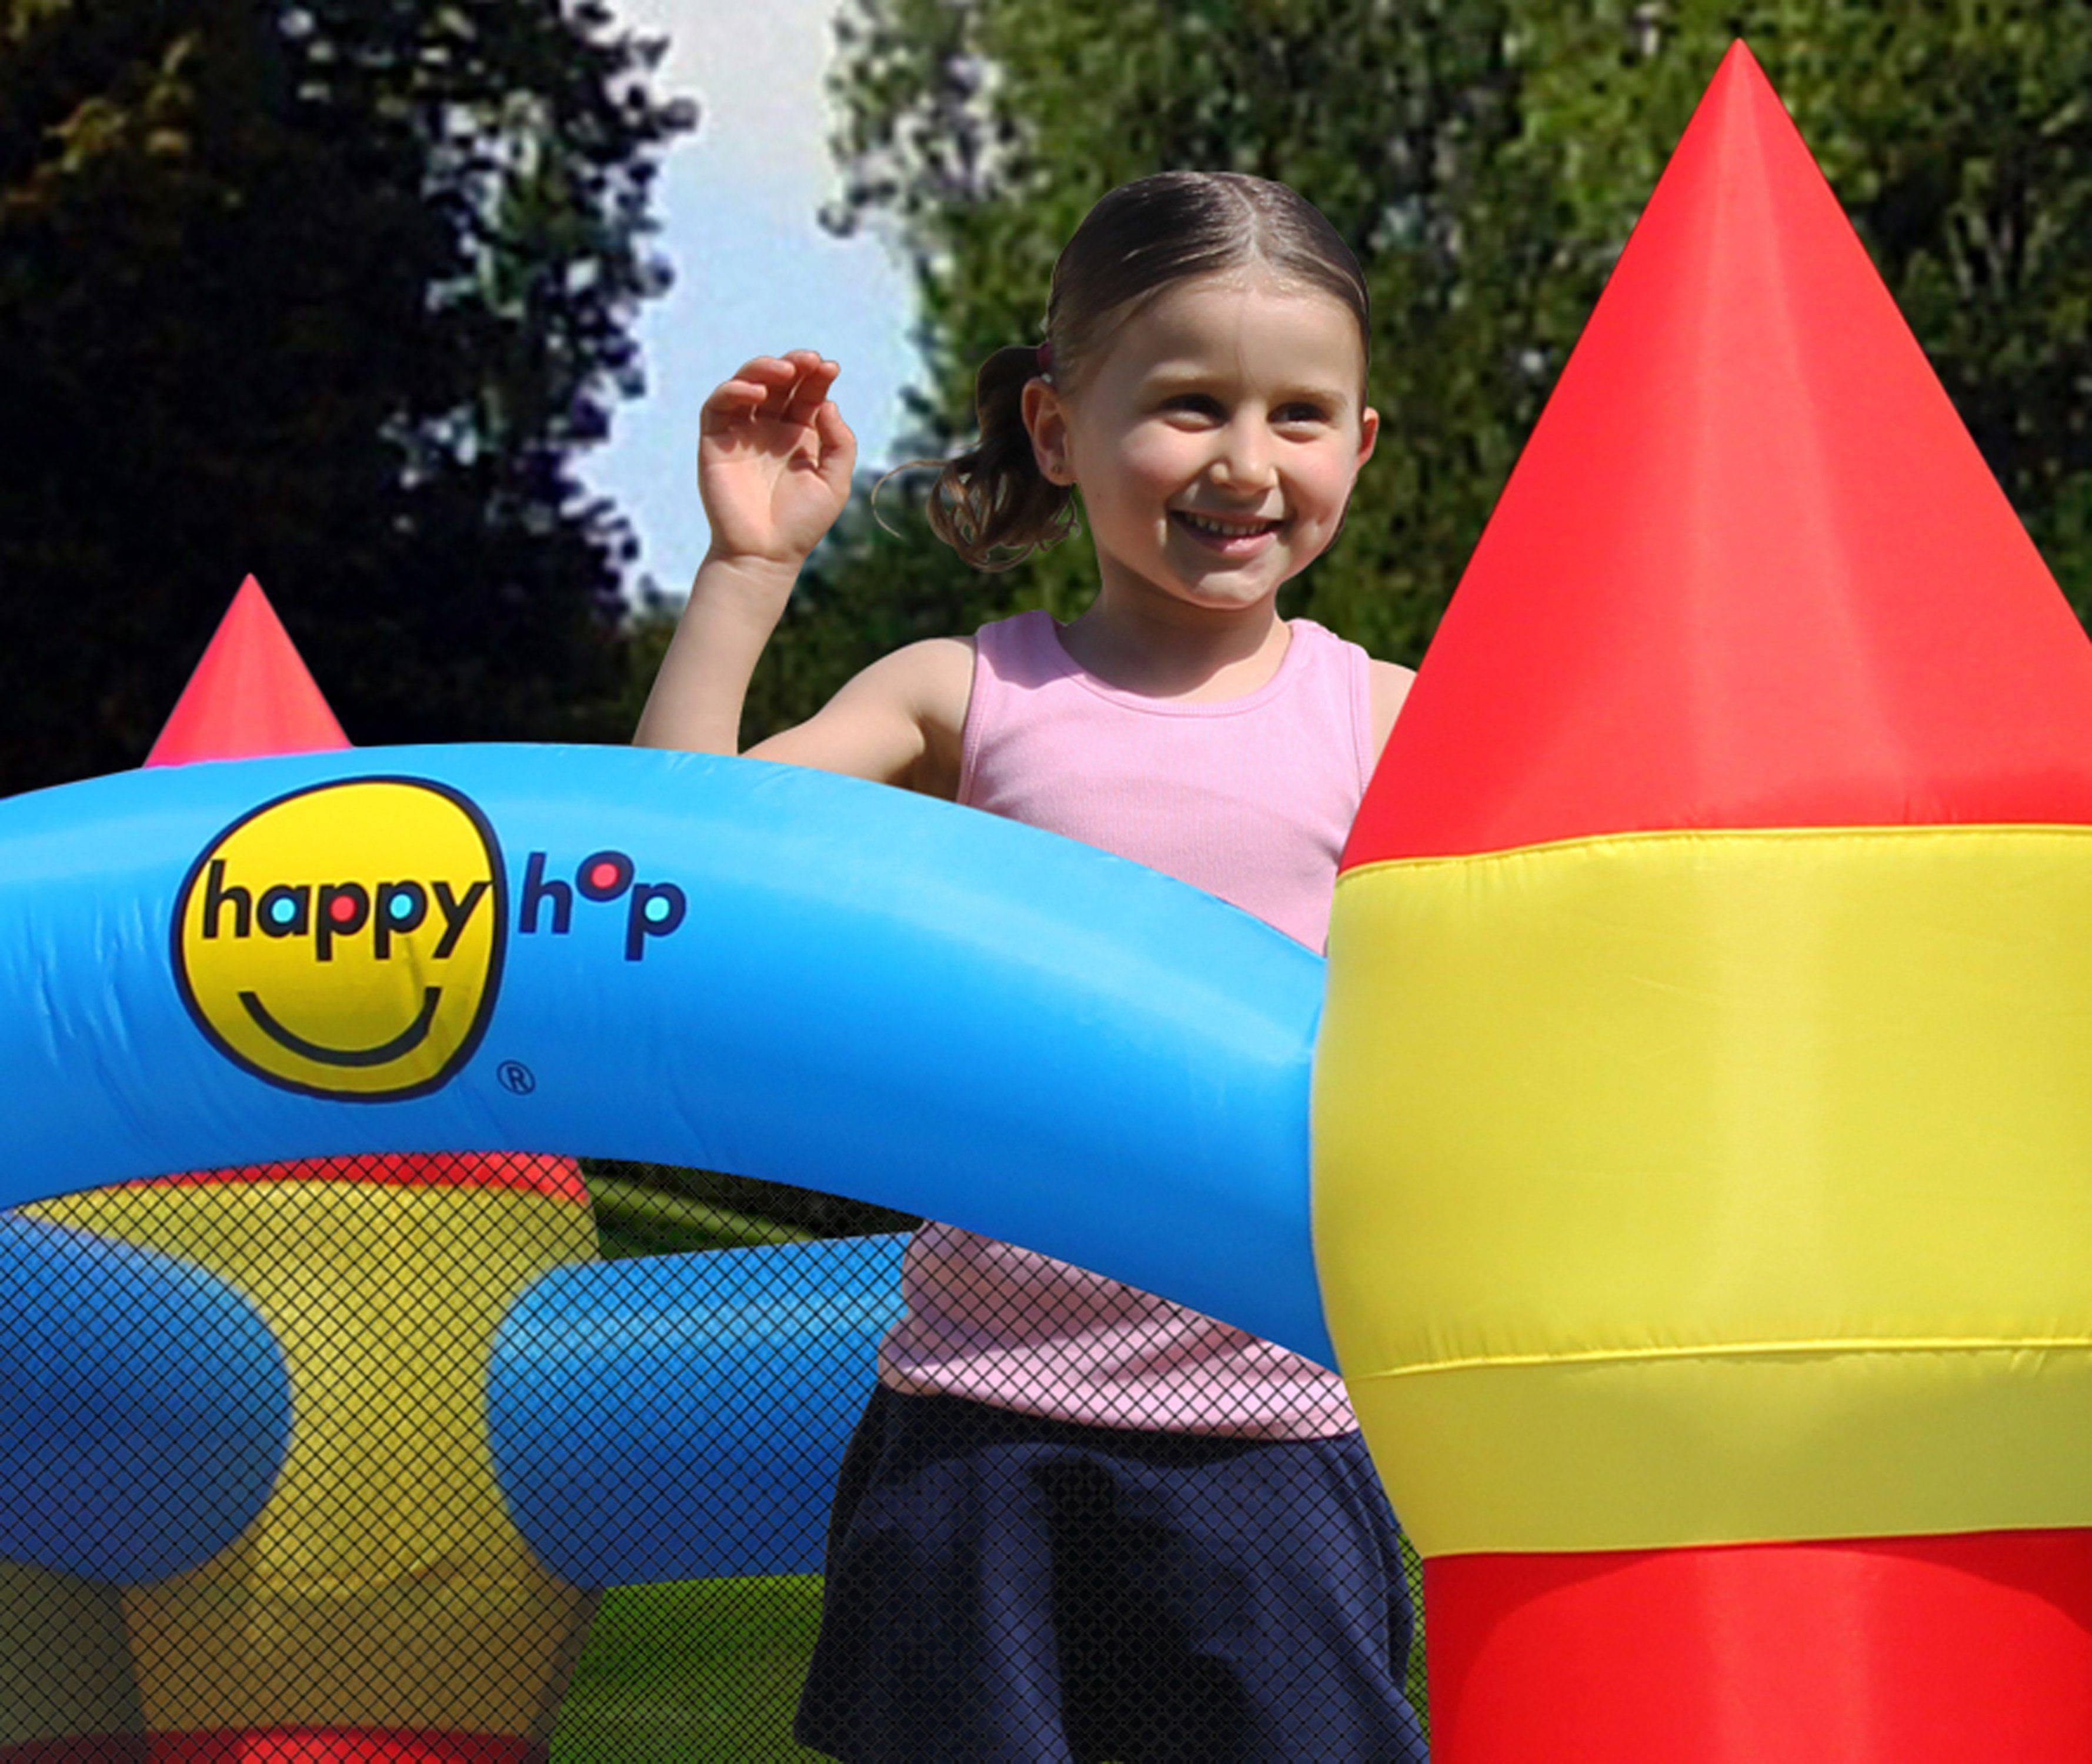 Castle Bouncer with Slide and Hoop - DTI Direct Canada